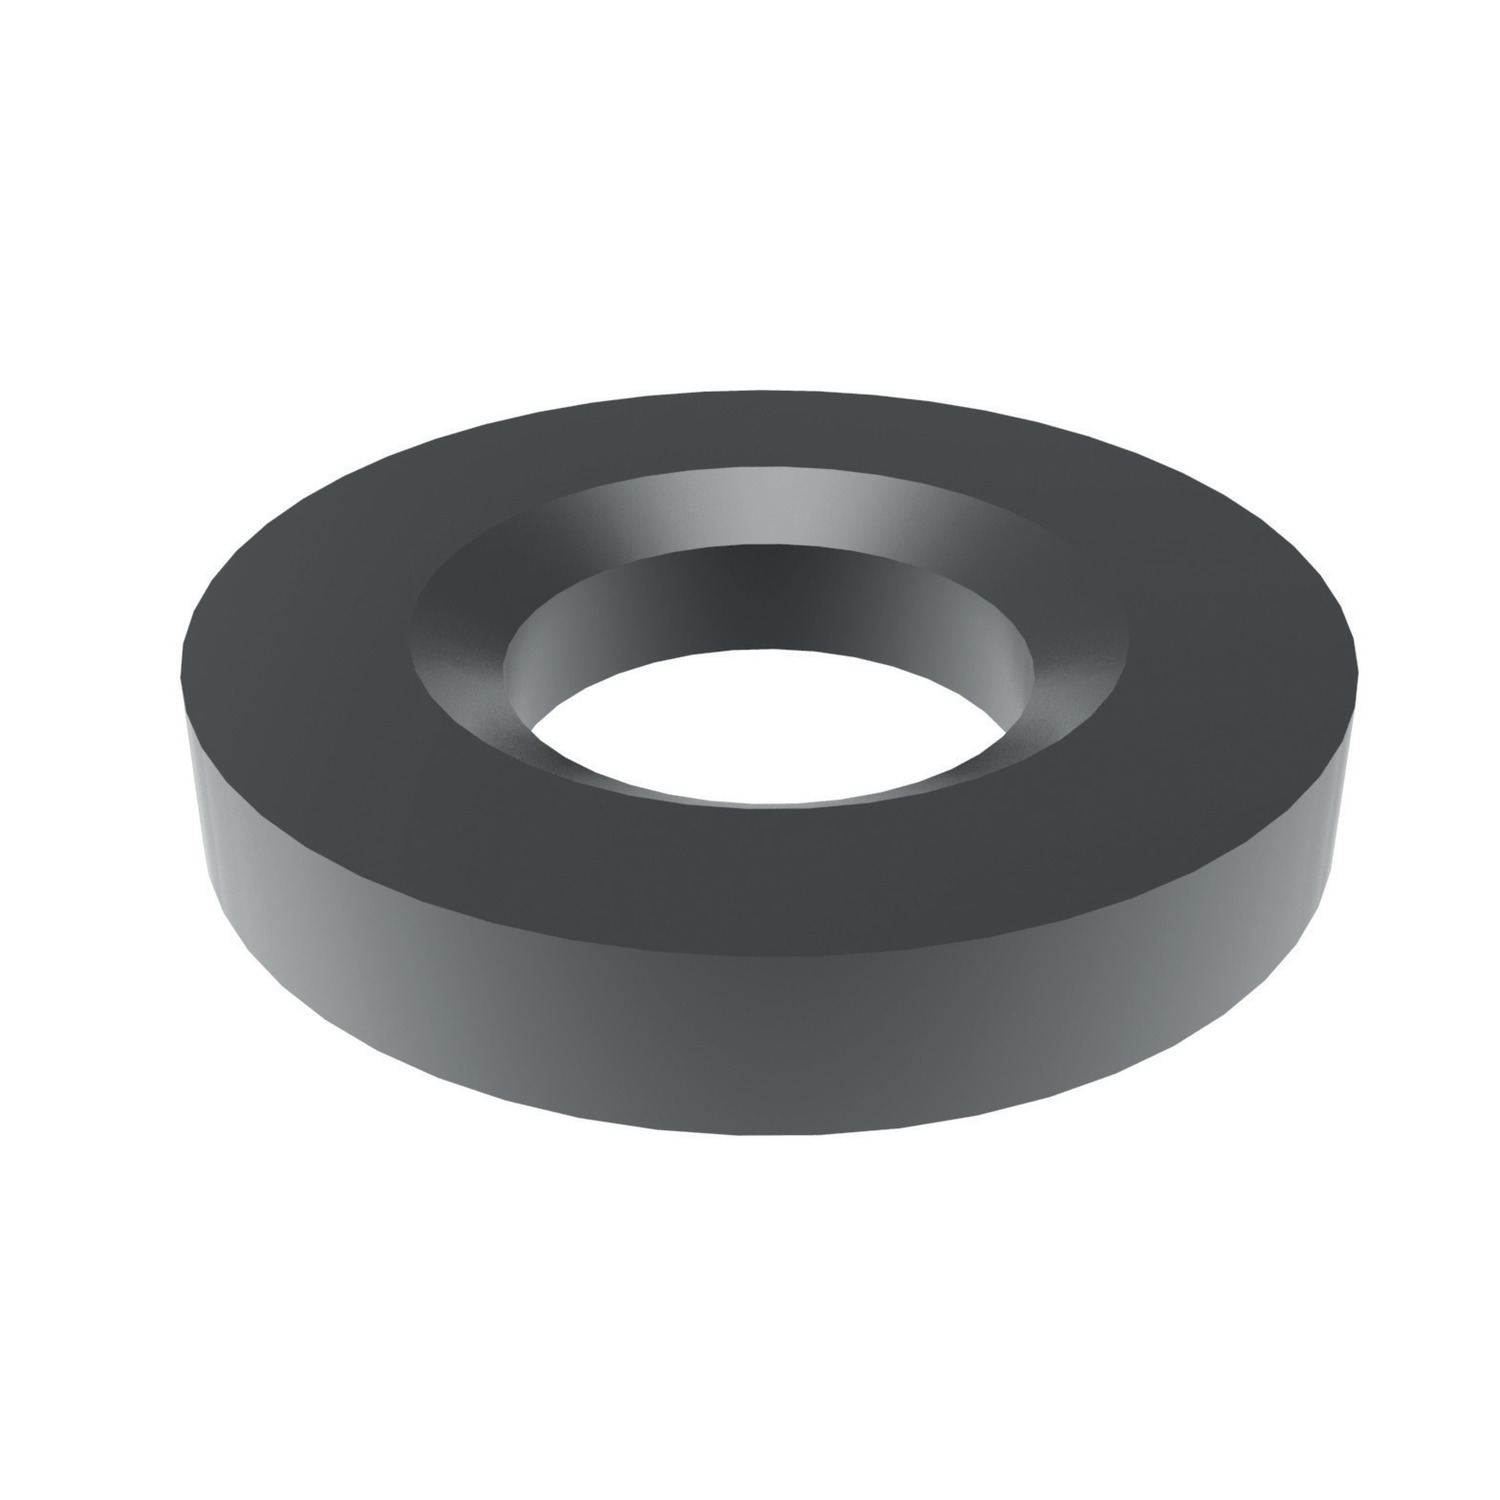 Dished Washers Tempered steel dished washers made to DIN 6319G. Punched, trued and tempered. Larger diameter makes them suitable for bridging clamp slots.